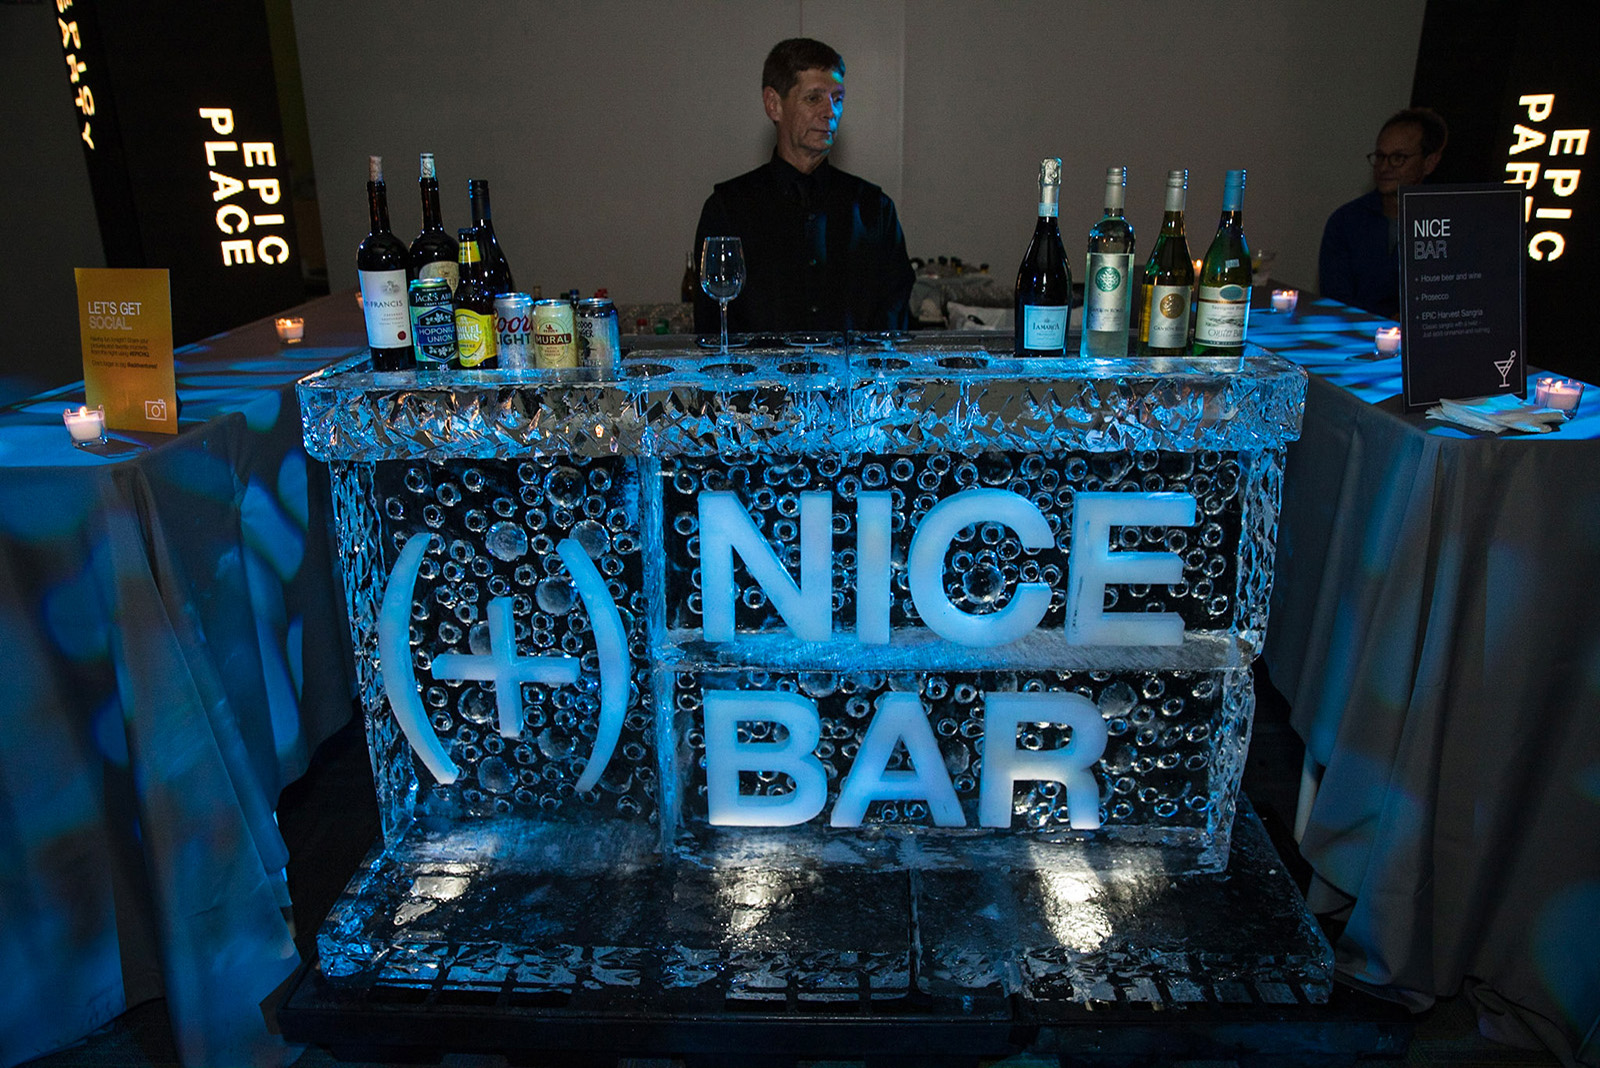 A bar made of a block of ice with a bartender behind it.